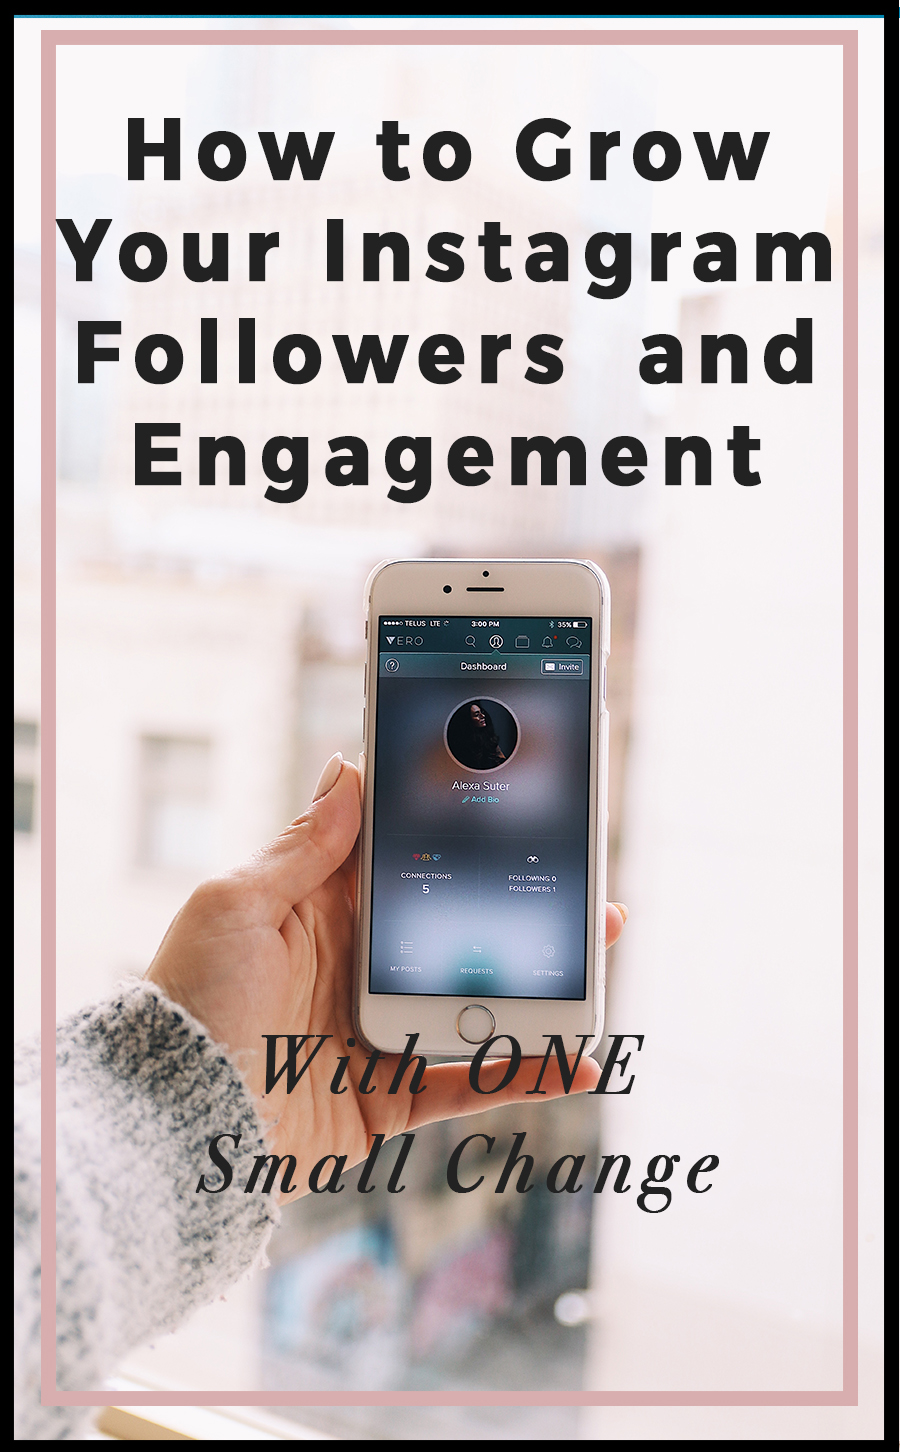 save - instagram followers that stay forever